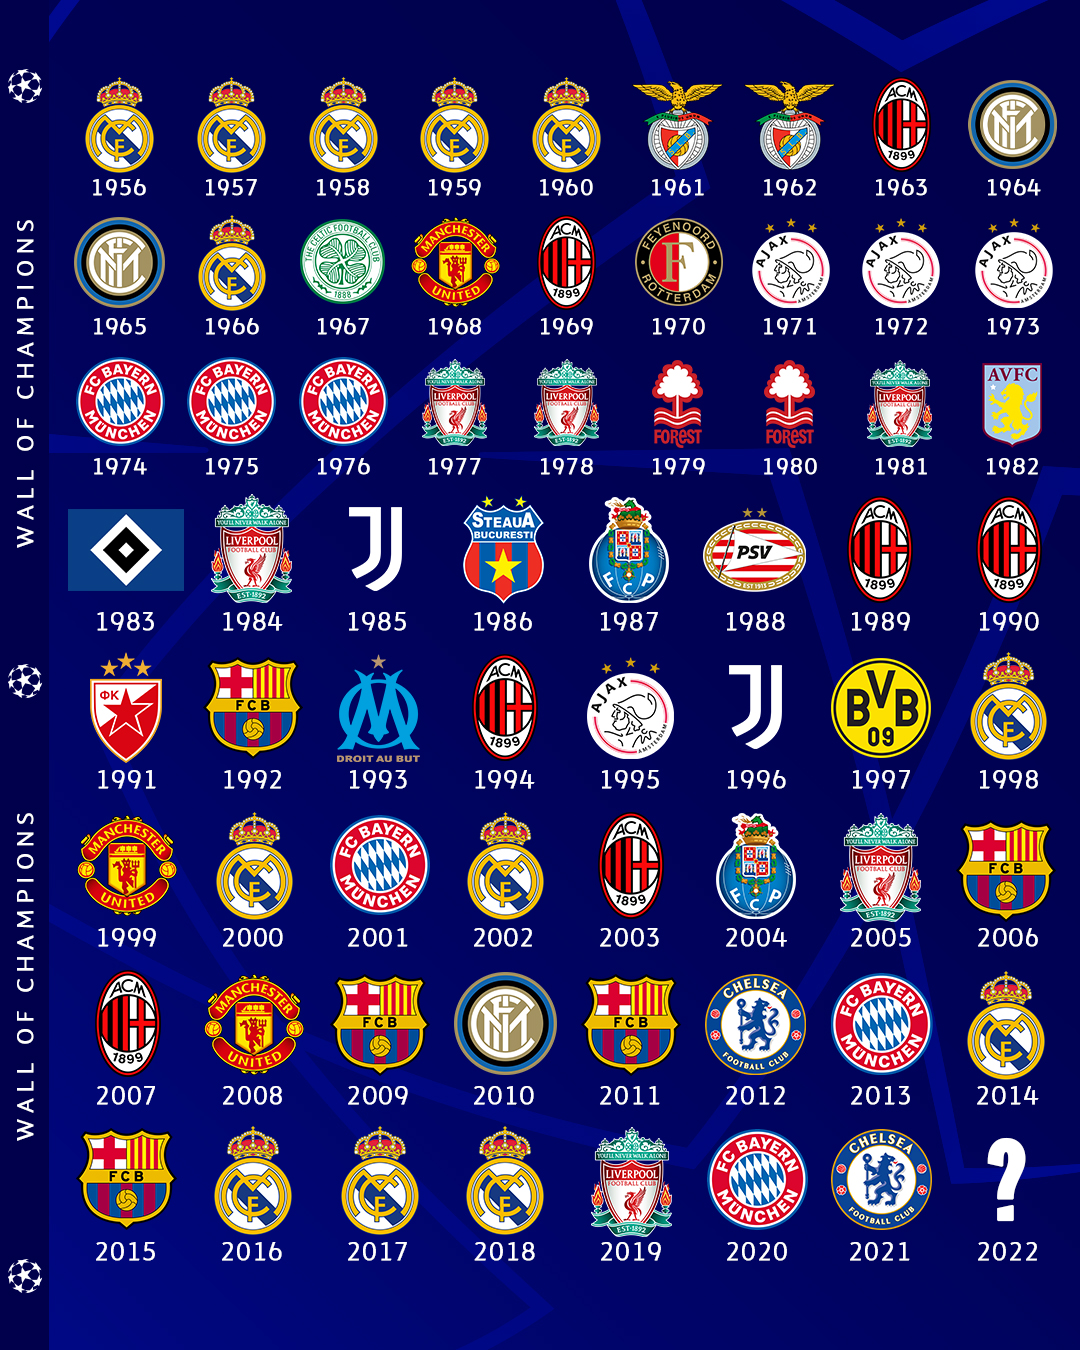 UEFA Champions League on Twitter: "🏆 Who won the European Cup the year you  were born? #UCLfinal https://t.co/ZuZZawsufb" / Twitter